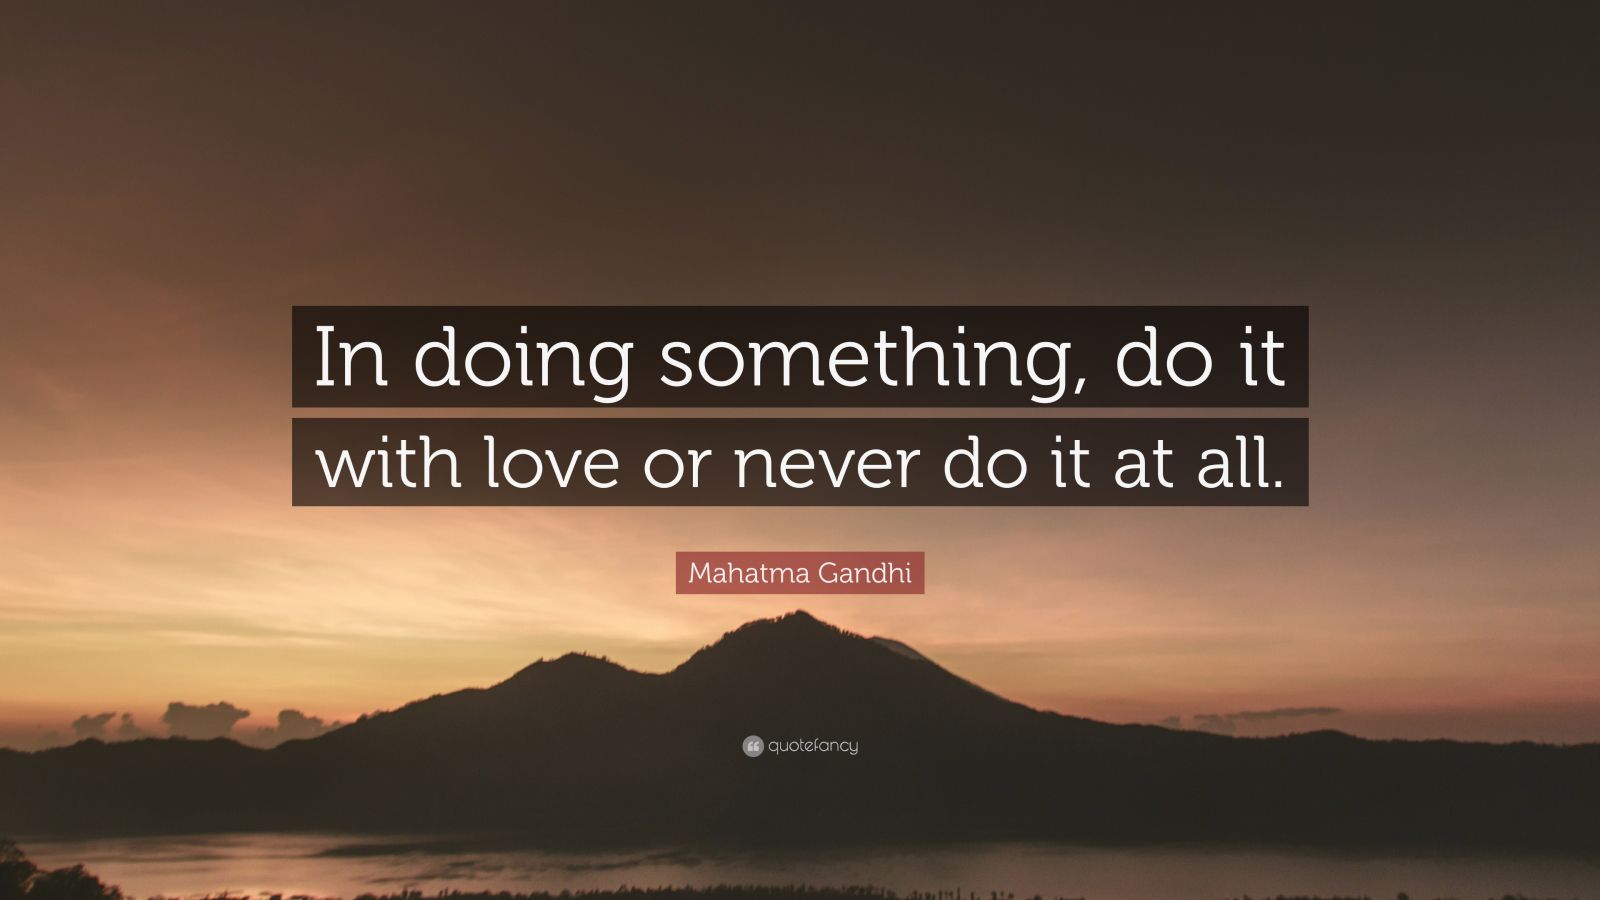 Mahatma Gandhi Quote In Doing Something, Do It With Love Or Never Do It At All 22 -9675